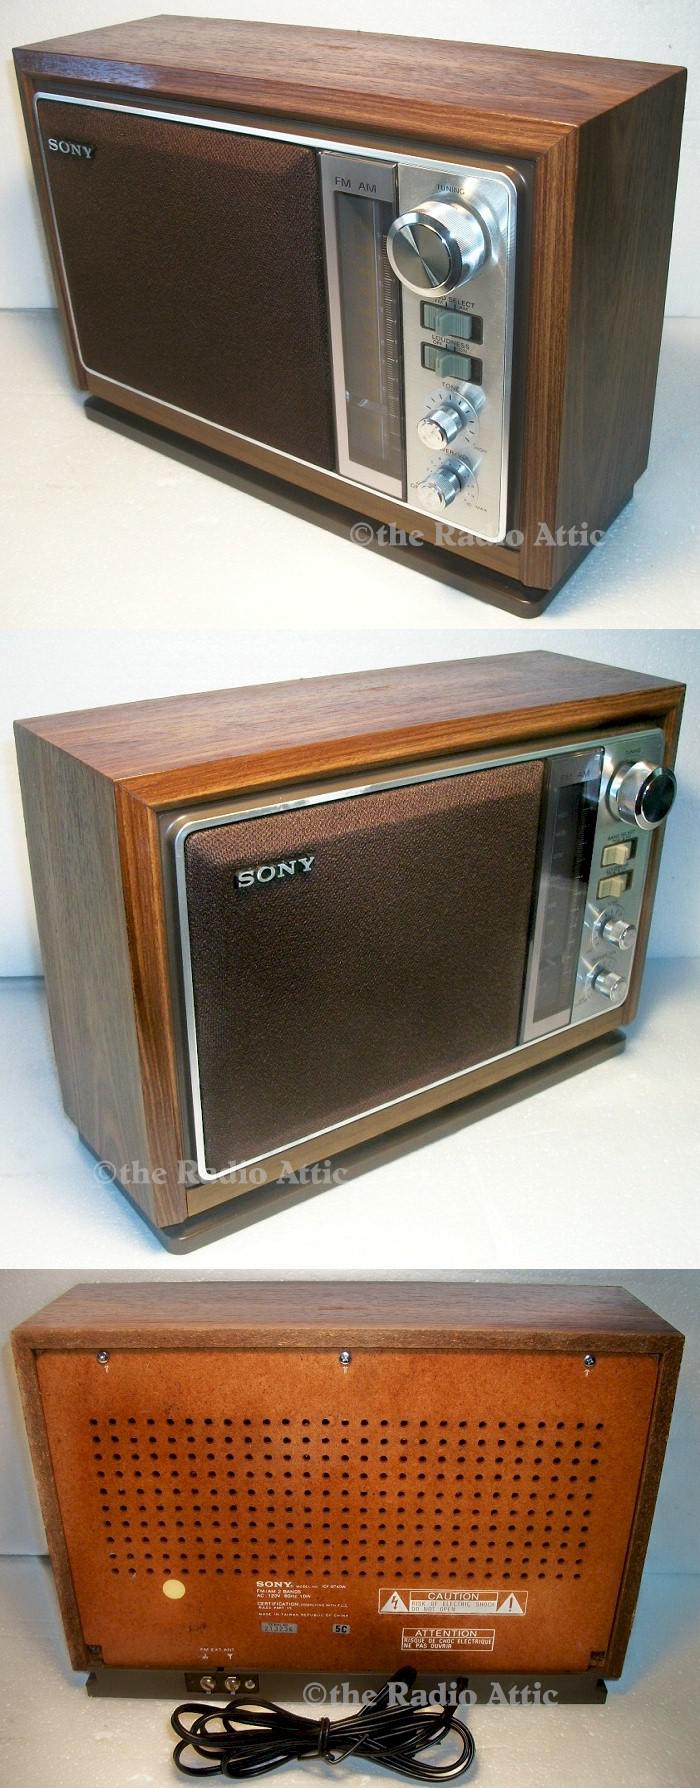 Sony ICF-9740W (1980) - SOLD! - item number 0021270